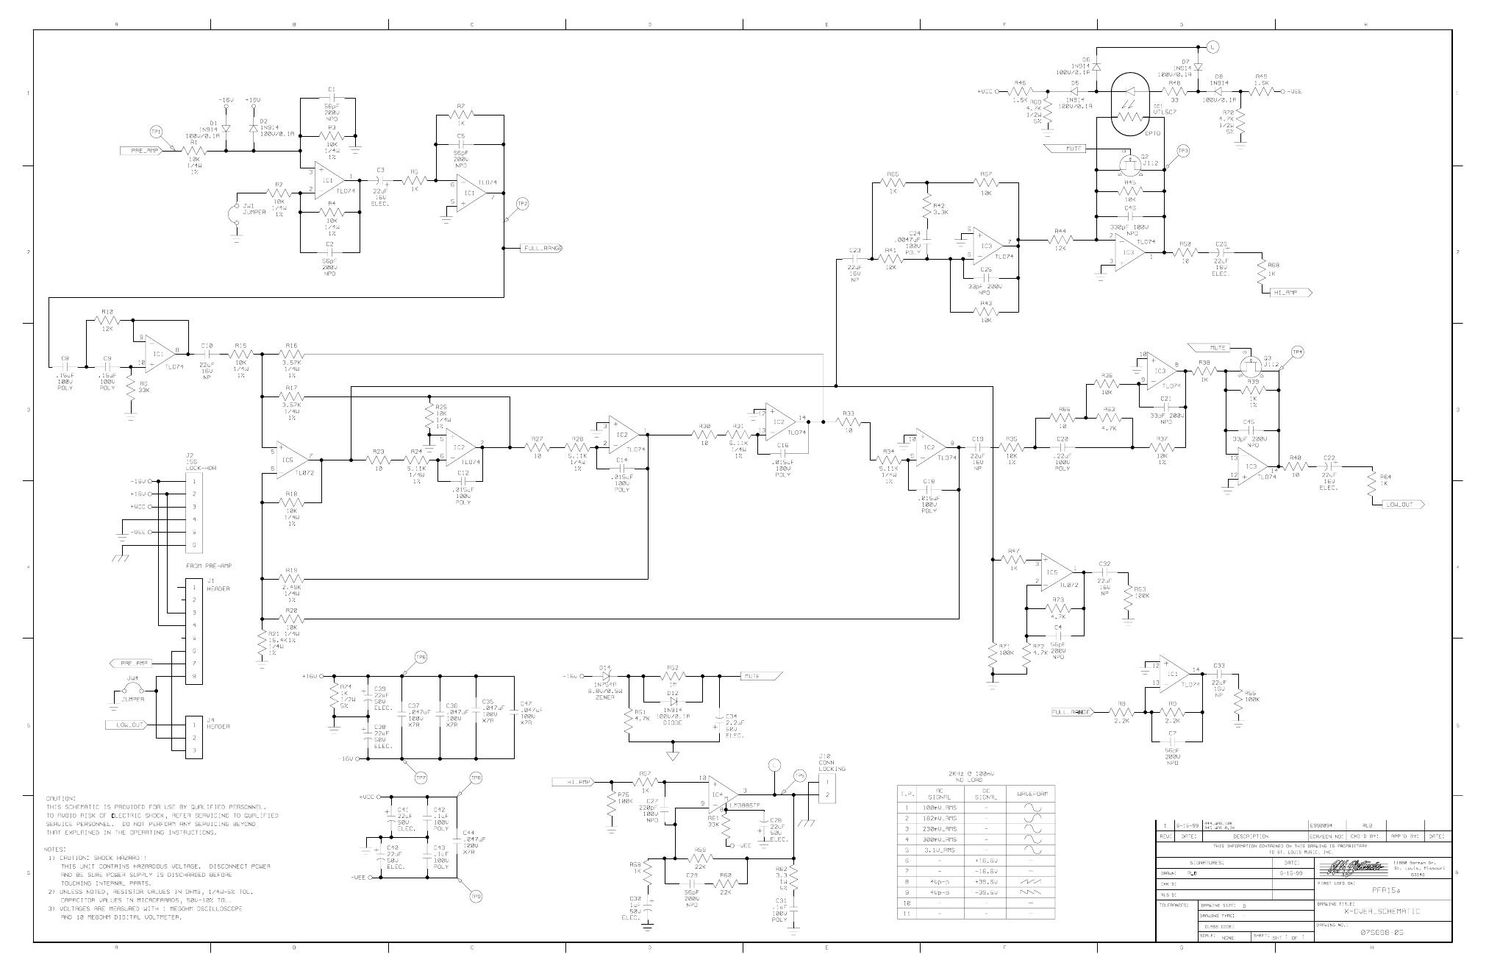 Crate PFR 15a Crossover 07S698 Schematic